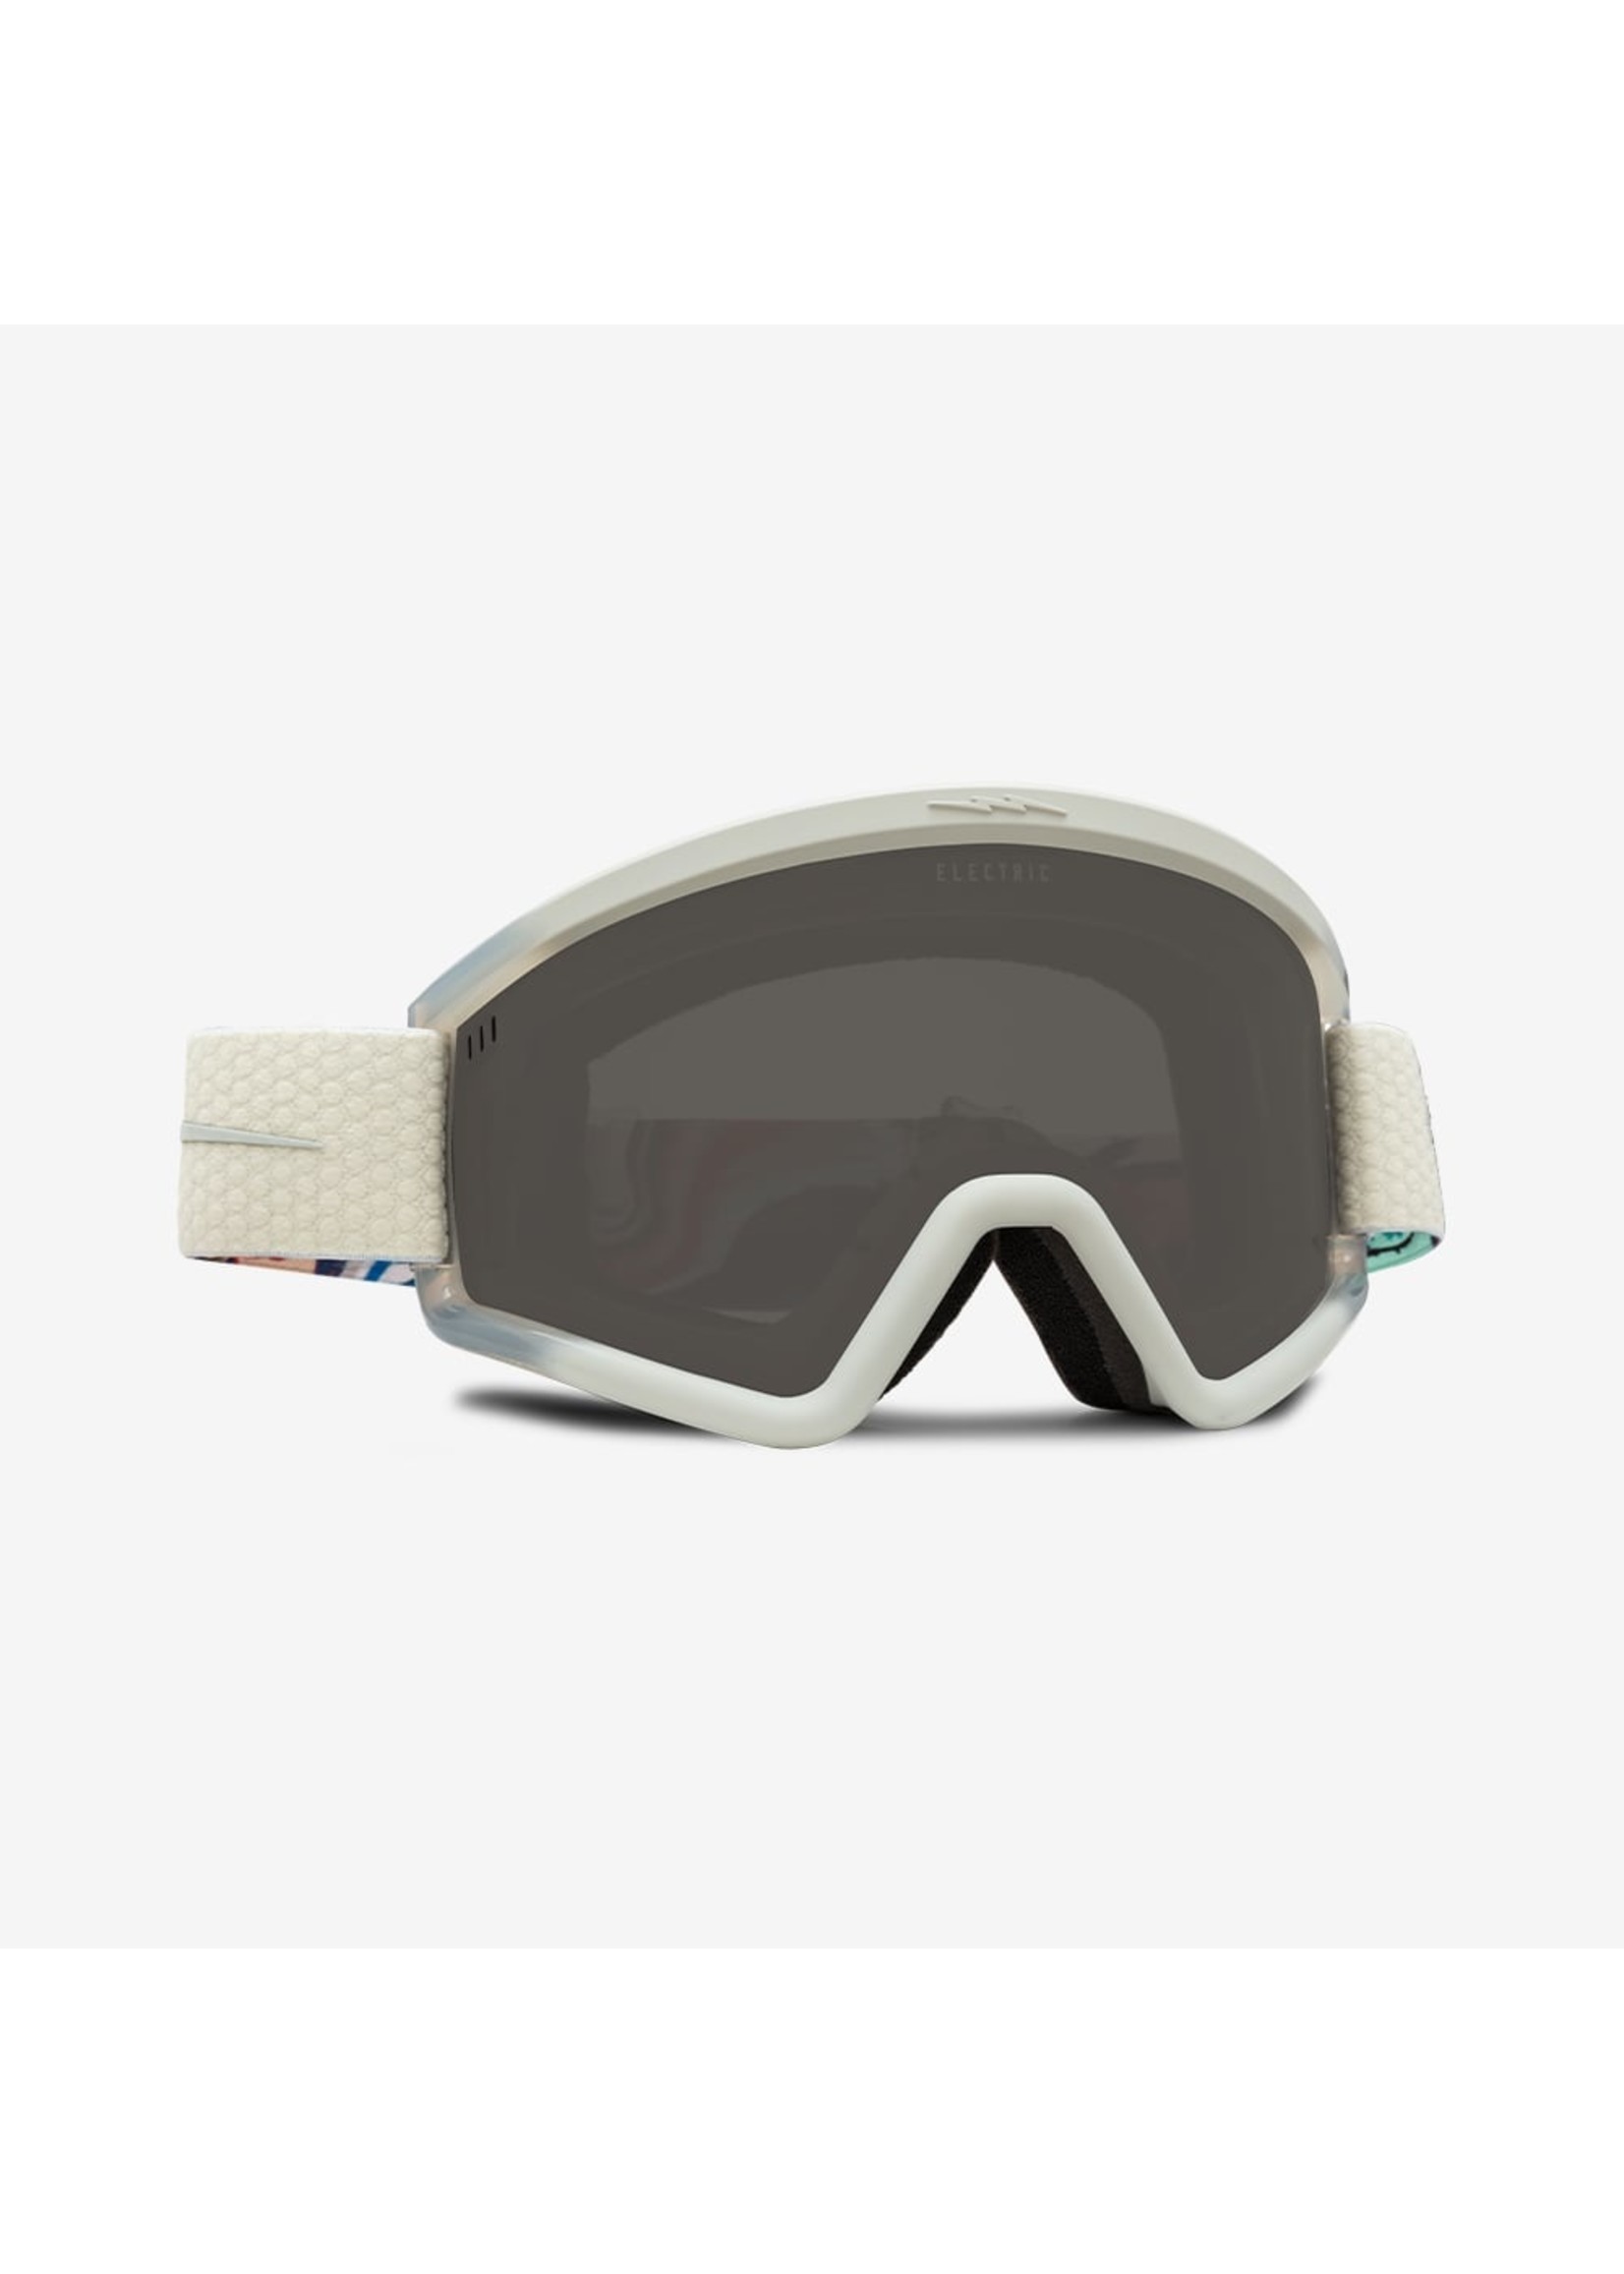 Electric HEX GOGGLE W22